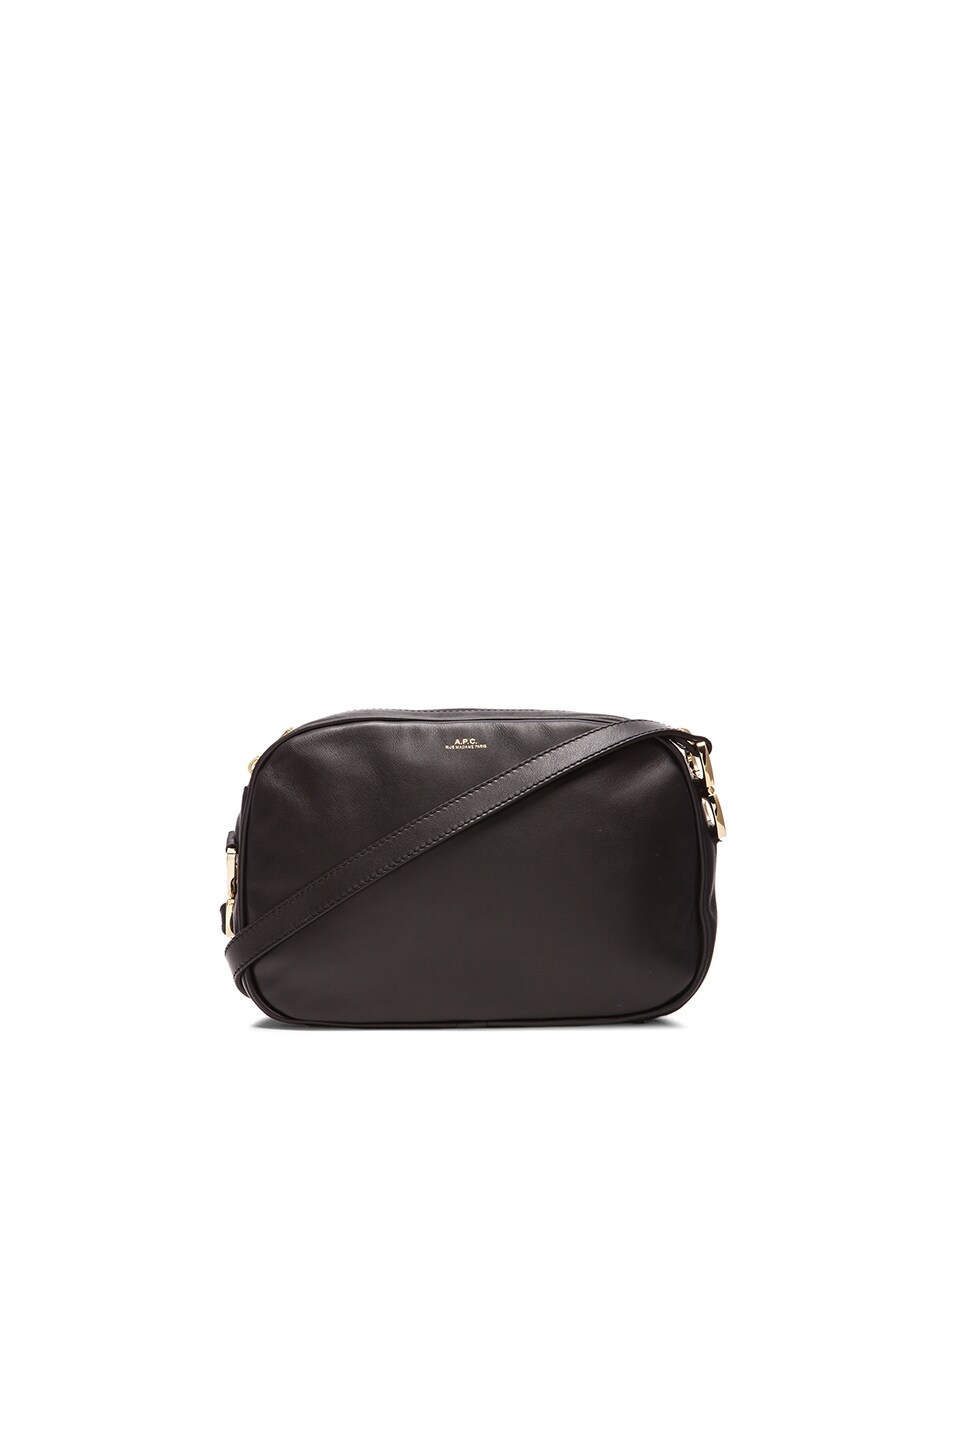 Image 1 of A.P.C. Blanche Bag in Black